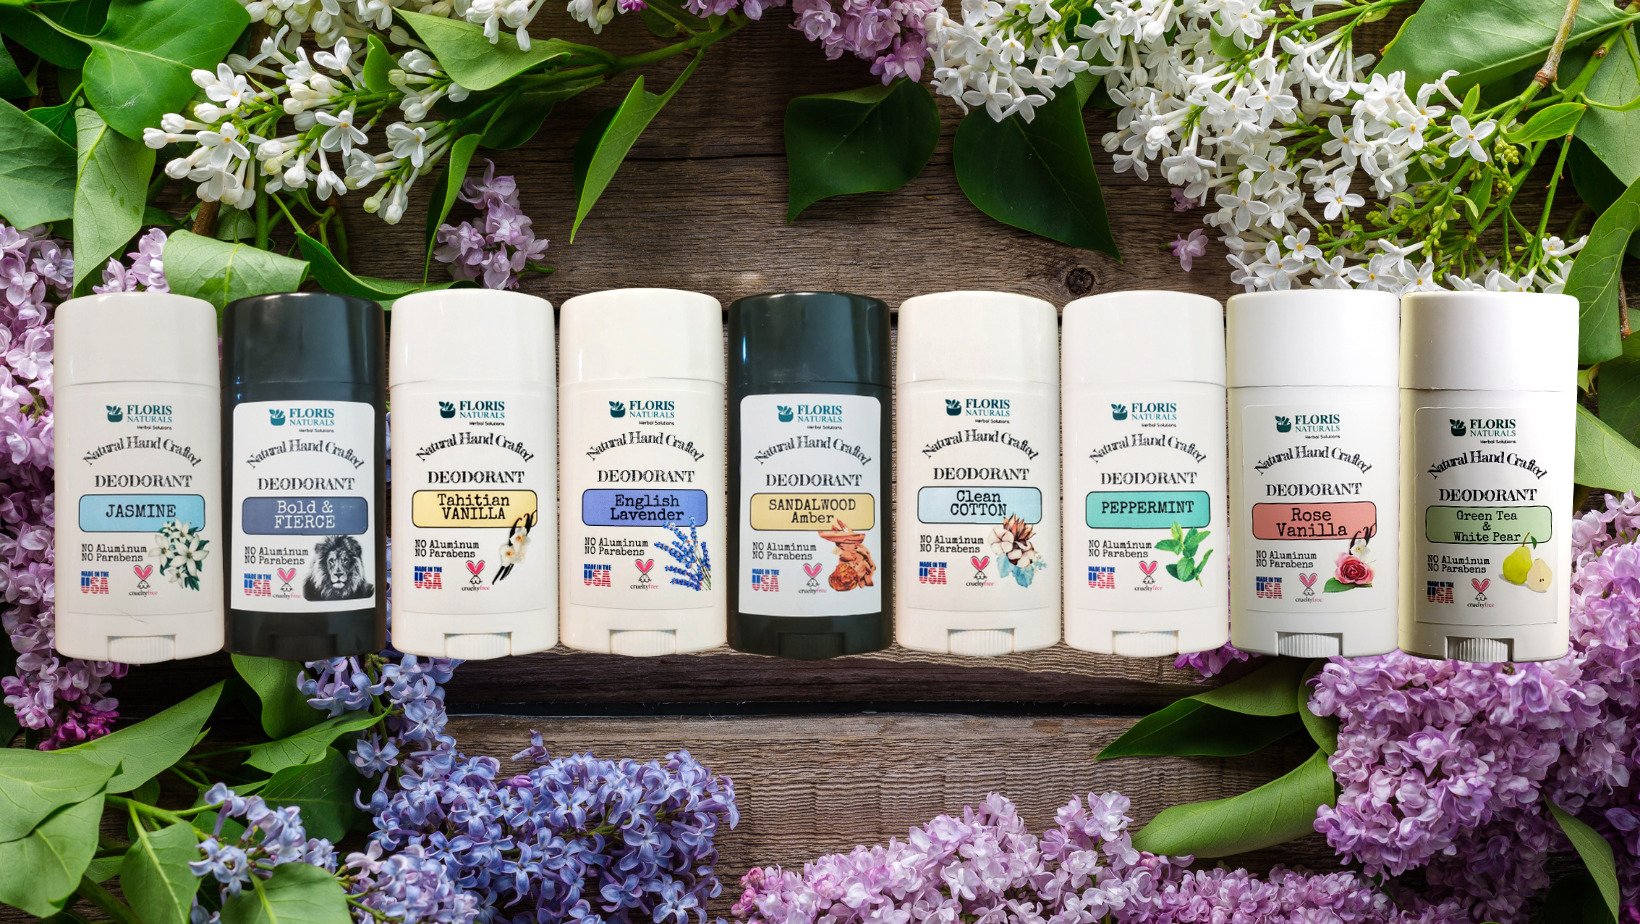 Switching from Commercial Deodorants to All-Natural Deodorants